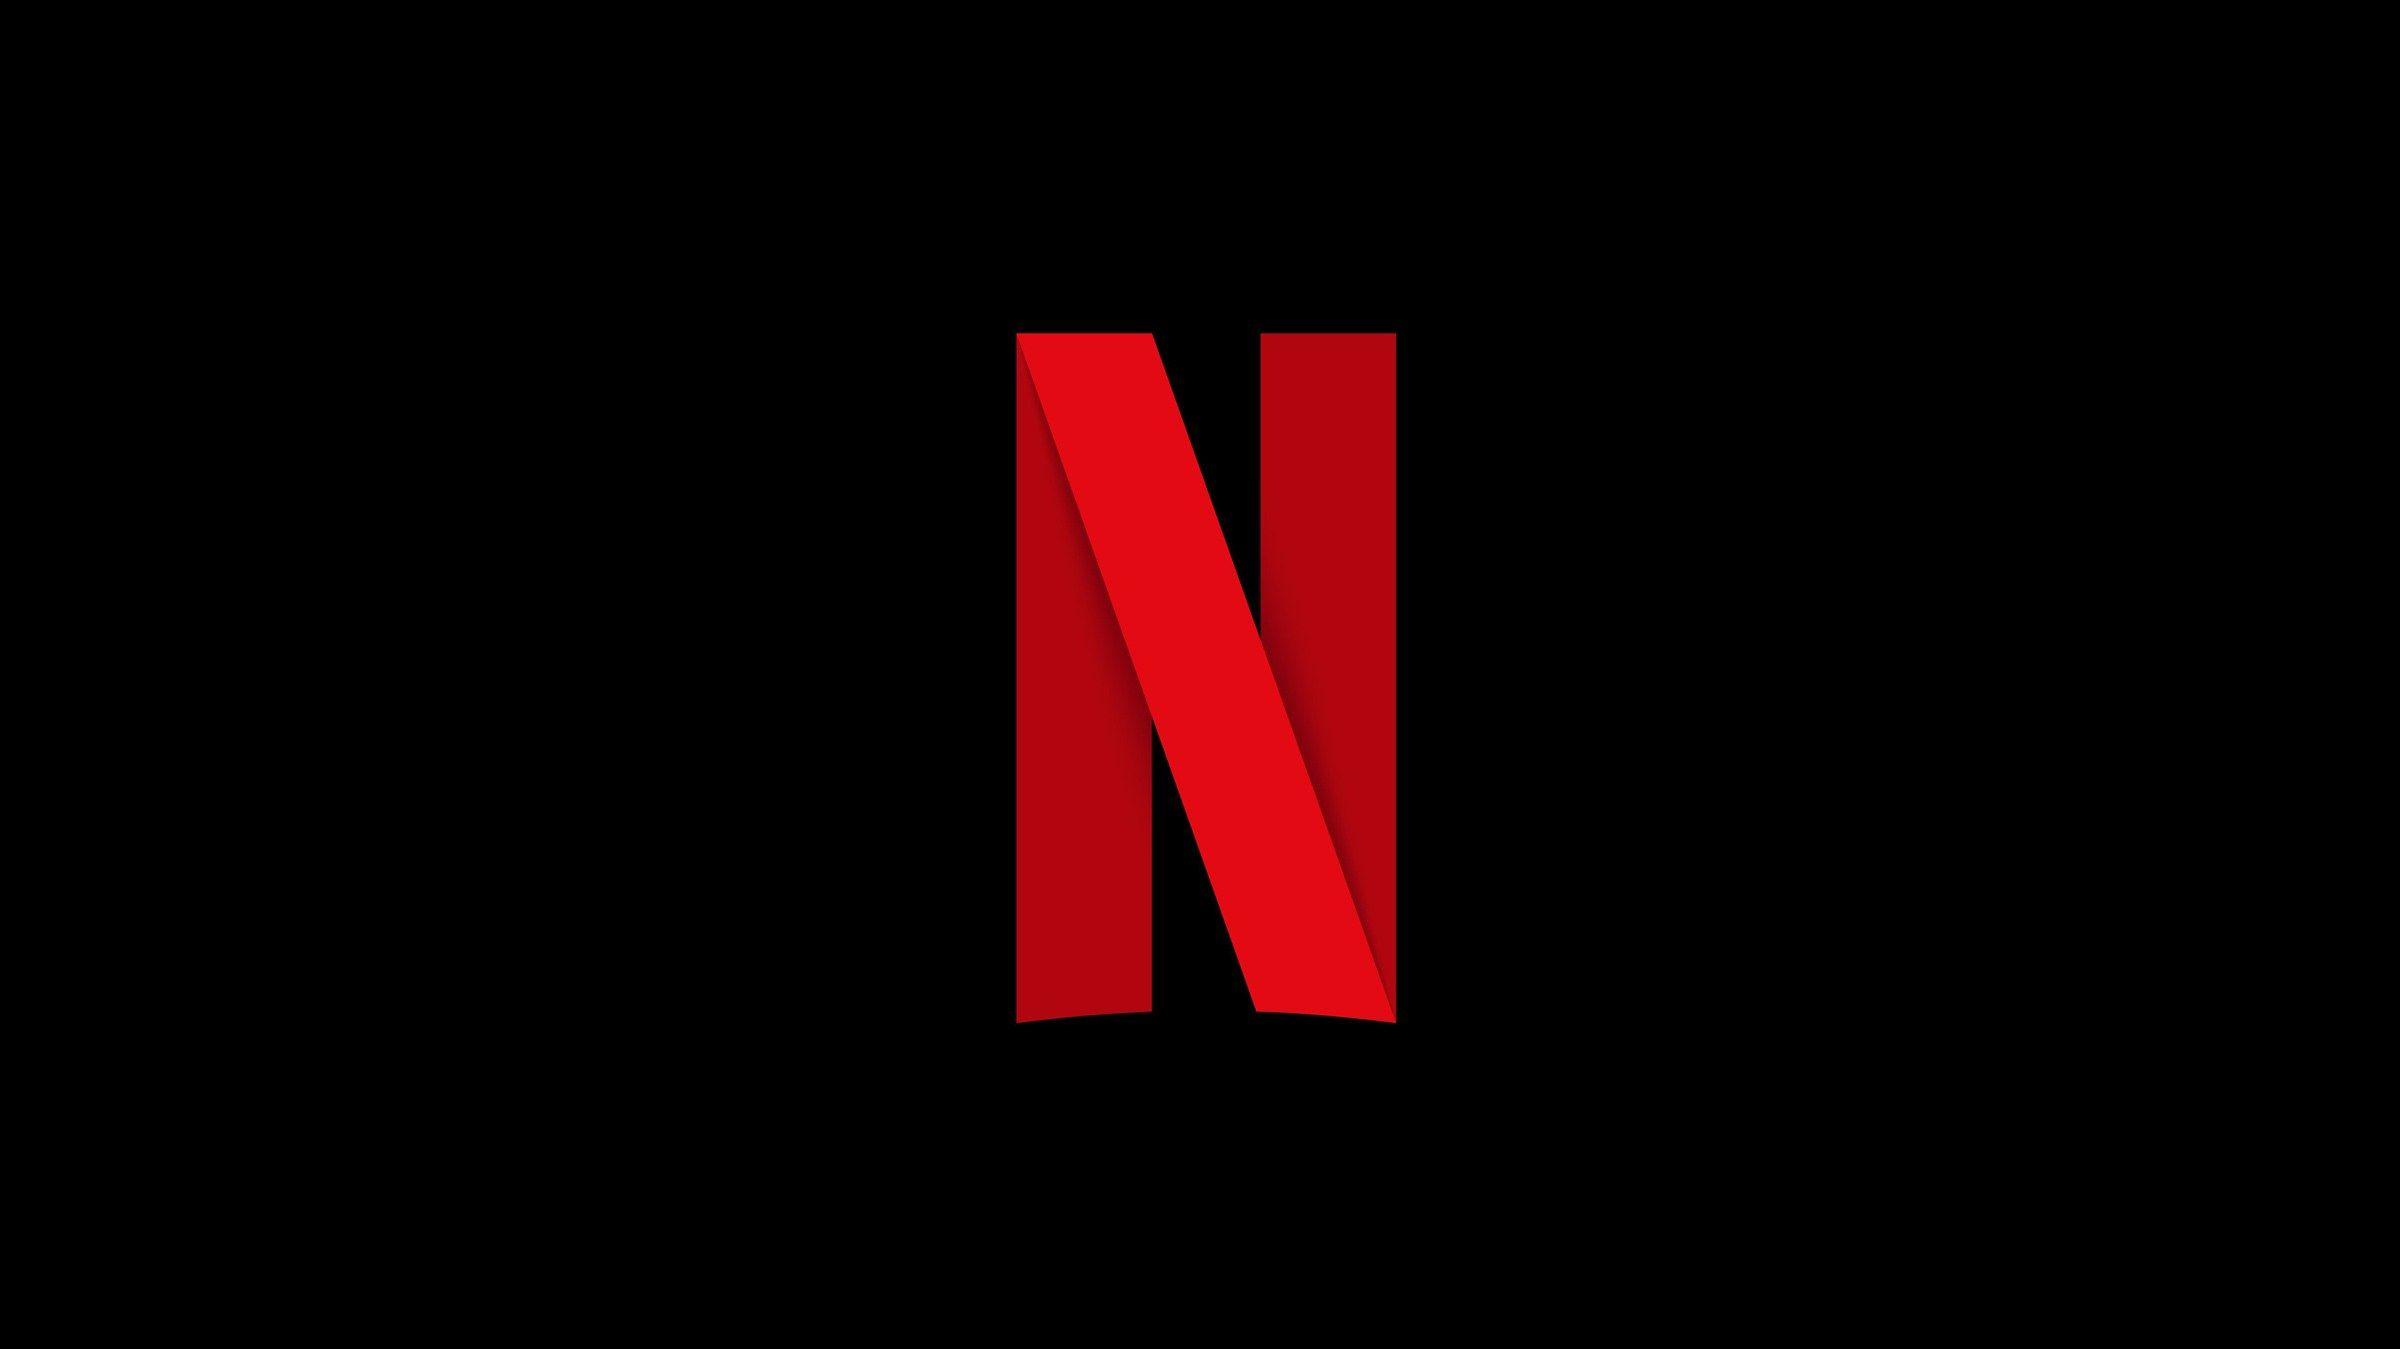 Netflix Cool Logo - Infographic: Netflix's New 'N' and the State of Logo Design